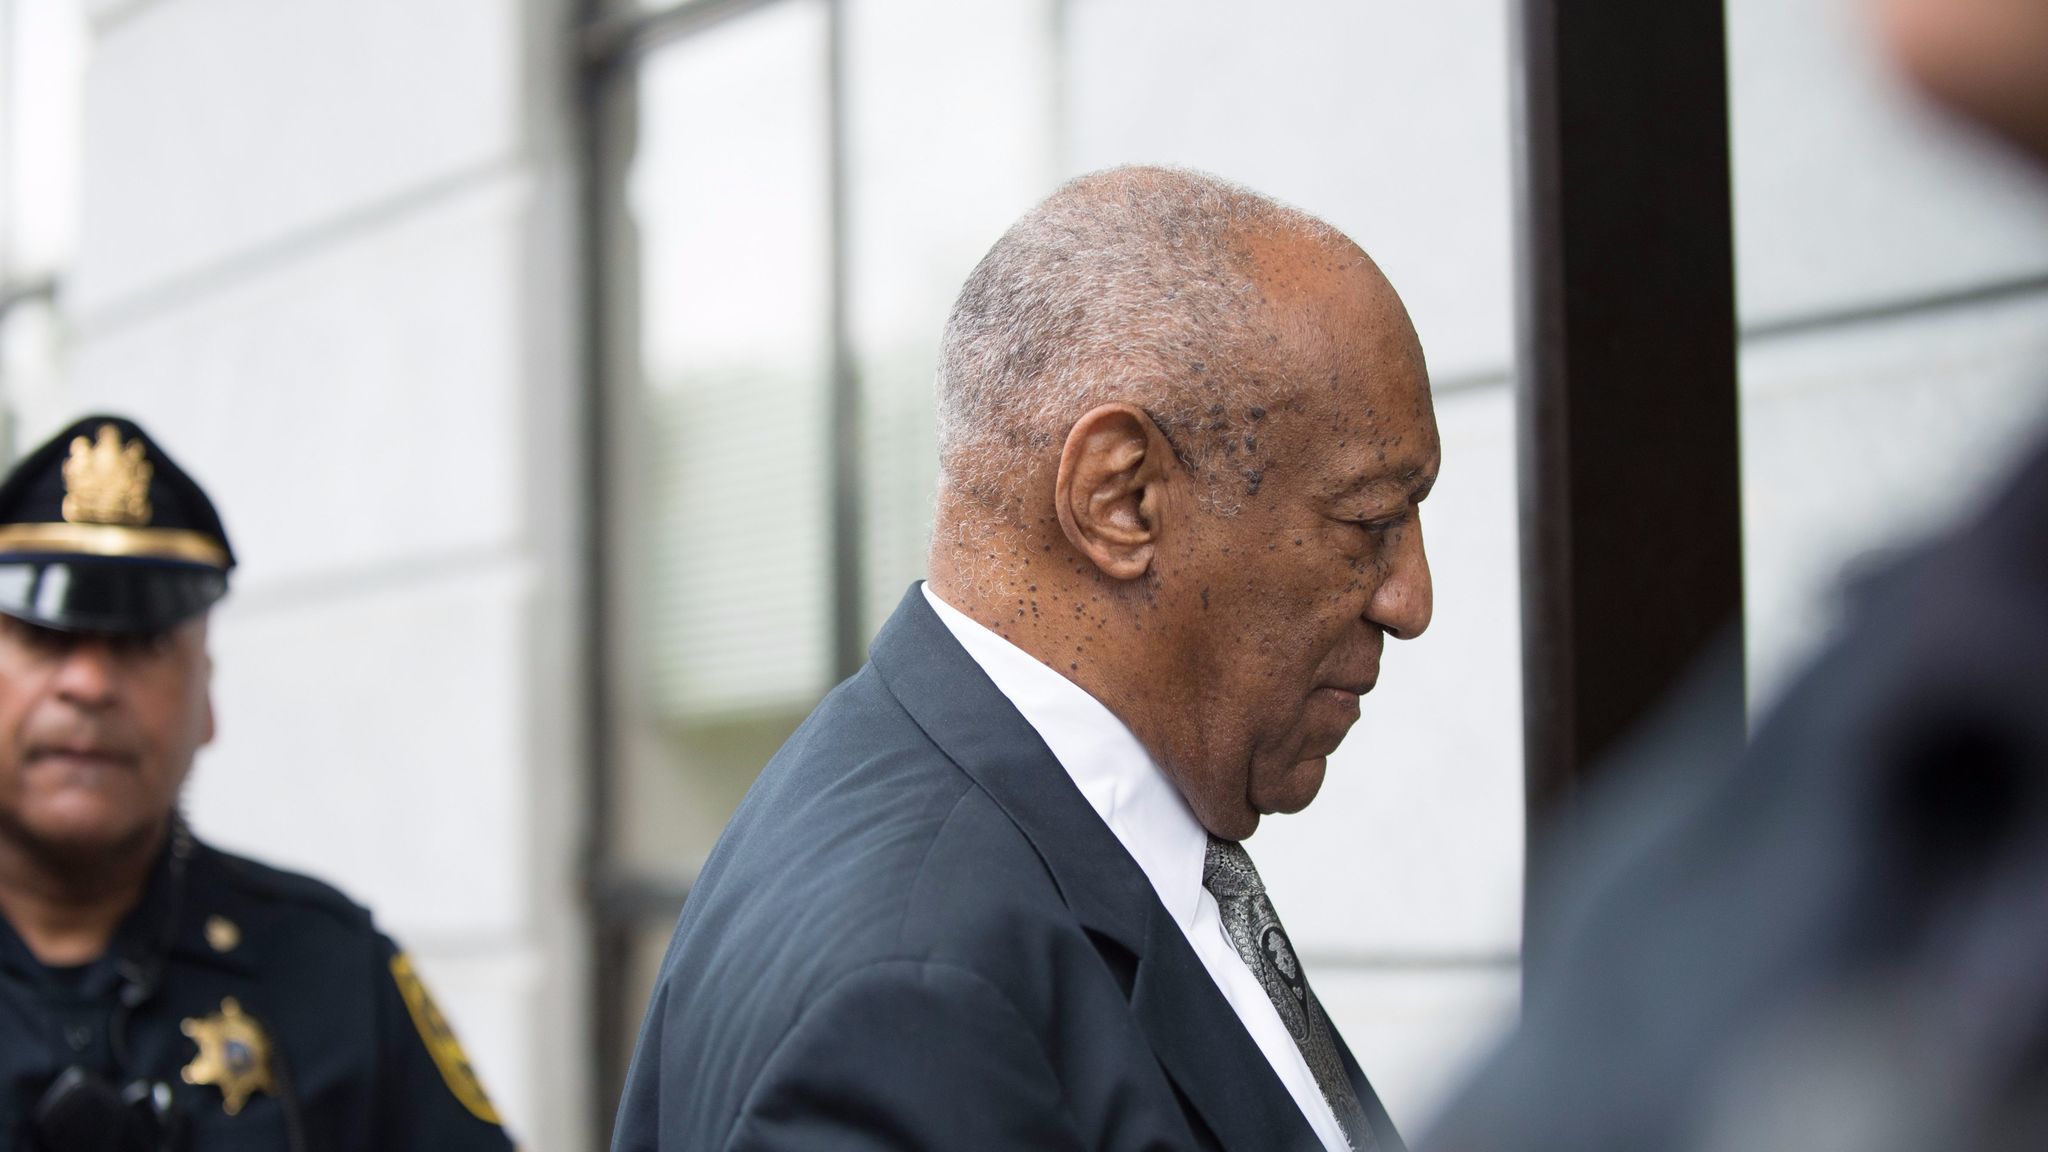 Bill Cosby arrives at the Montgomery County Courthouse for a sixth day of jury deliberations in the trial against him.